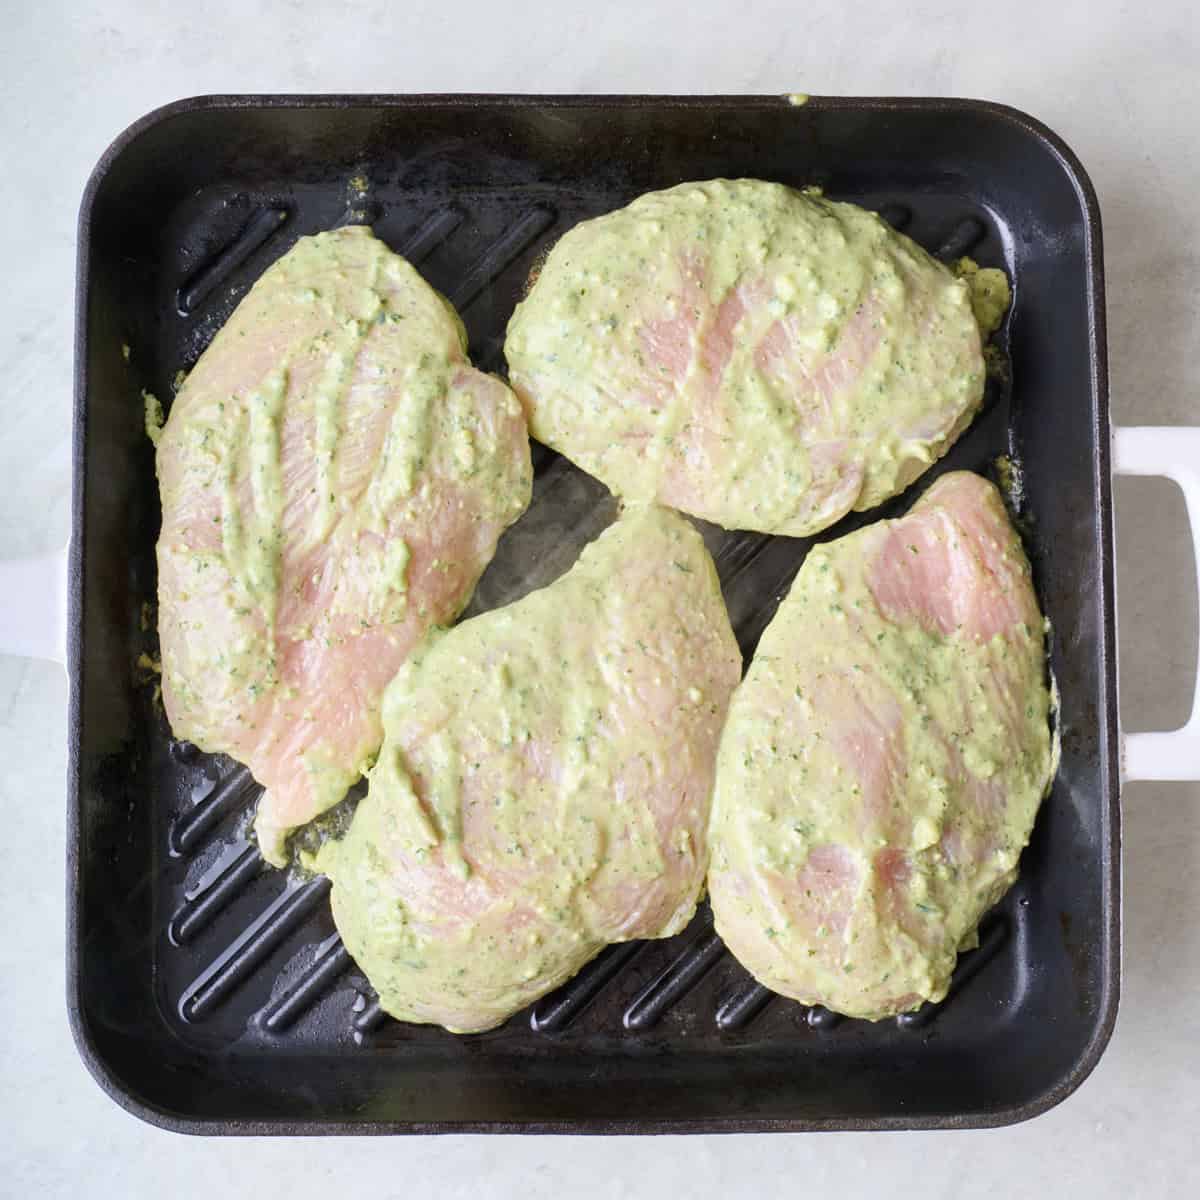 Marinated chicken breast on a grill pan.